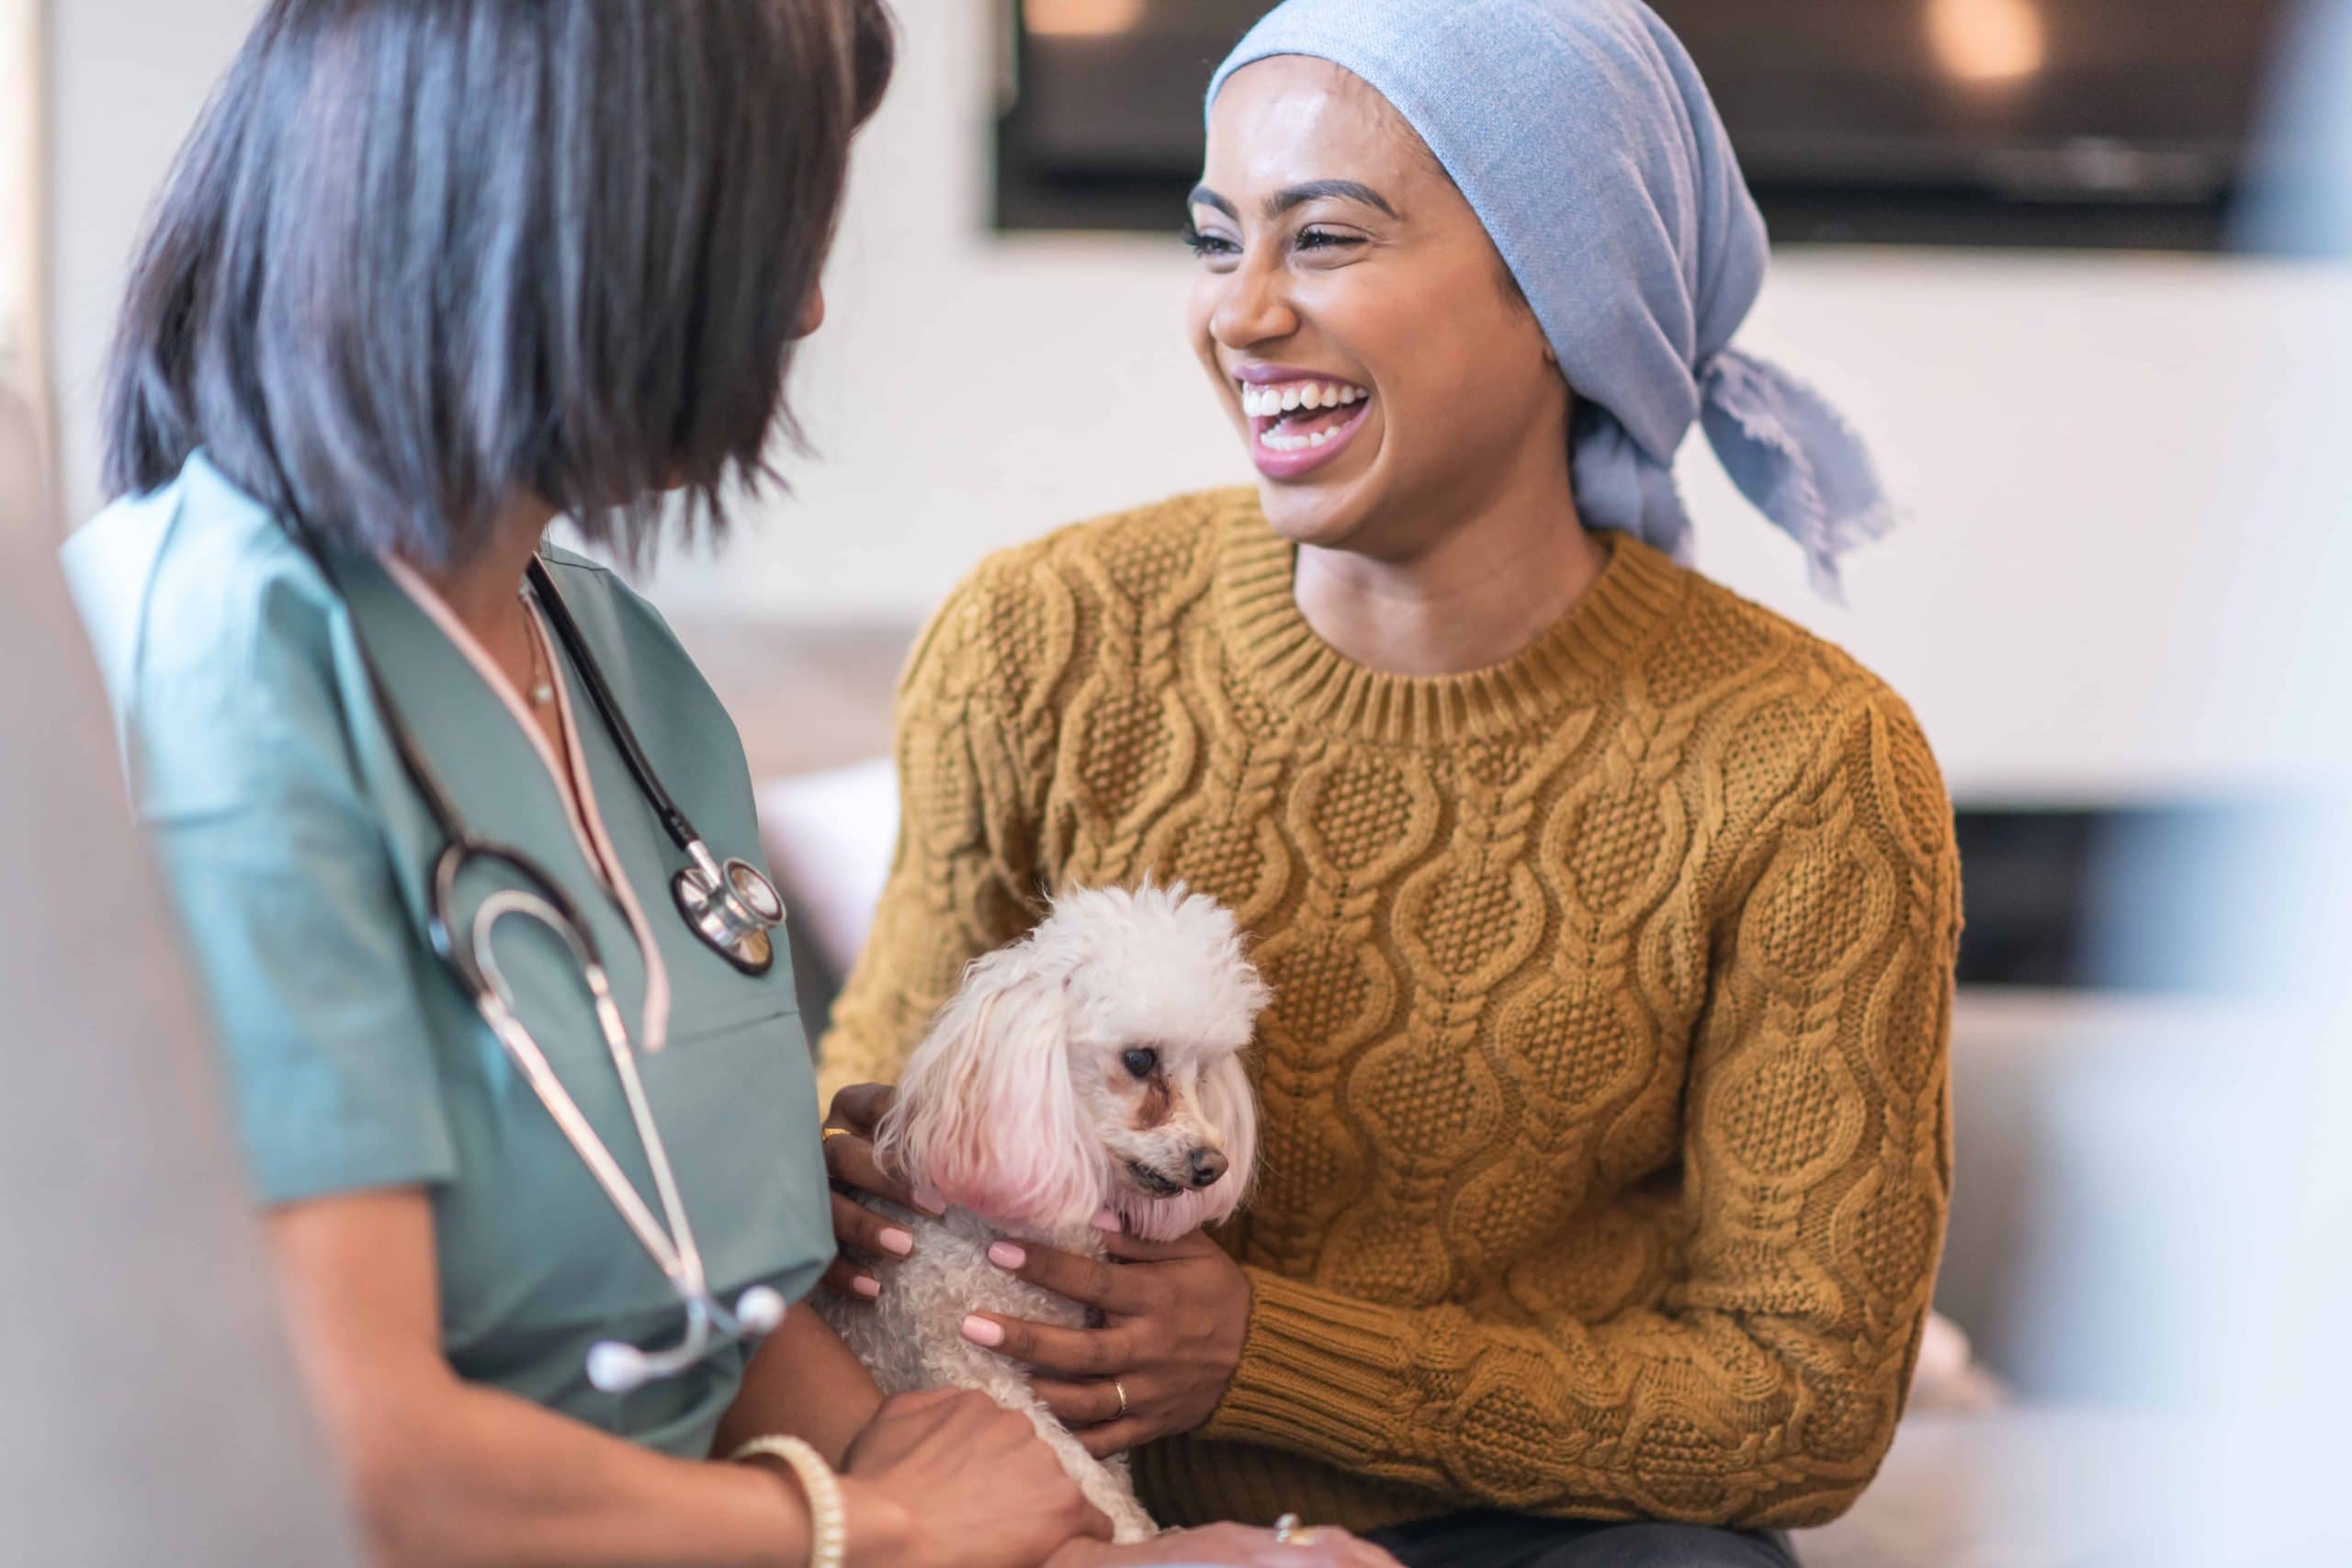 A mixed-race woman with cancer is meeting with her female physician. The patient is laughing while having a conversation with her doctor. She is holding her pet dog on her lap. The patient is wearing a headscarf to hide her hair loss from chemotherapy treatment.